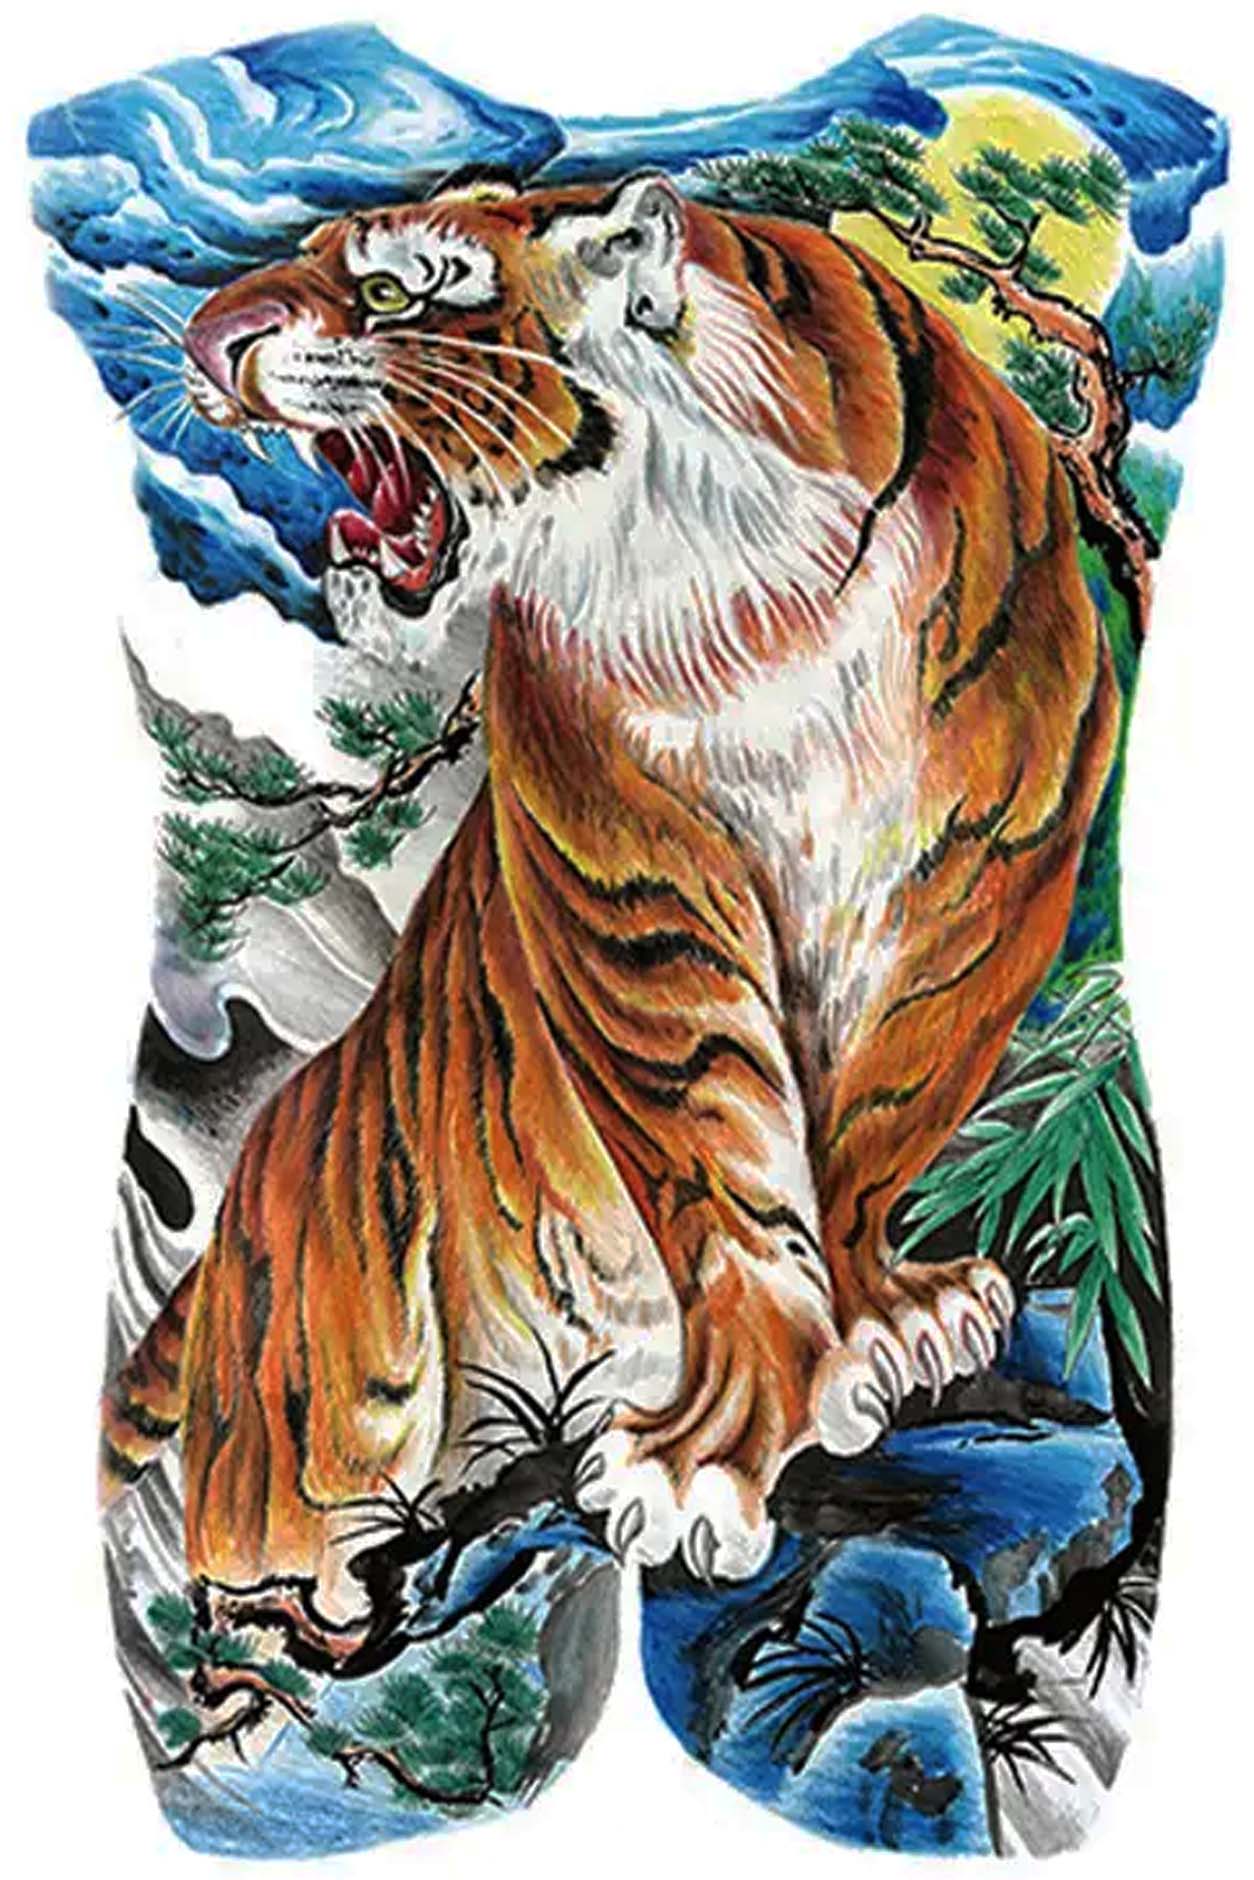 Stay alert with this tiger on your back! Orange tigers are cunning and suspicious in a clever way. They exude strength, independence, and assertiveness. This tattoo will take power over your back as he stands proud over a colorful valley full of bamboo.